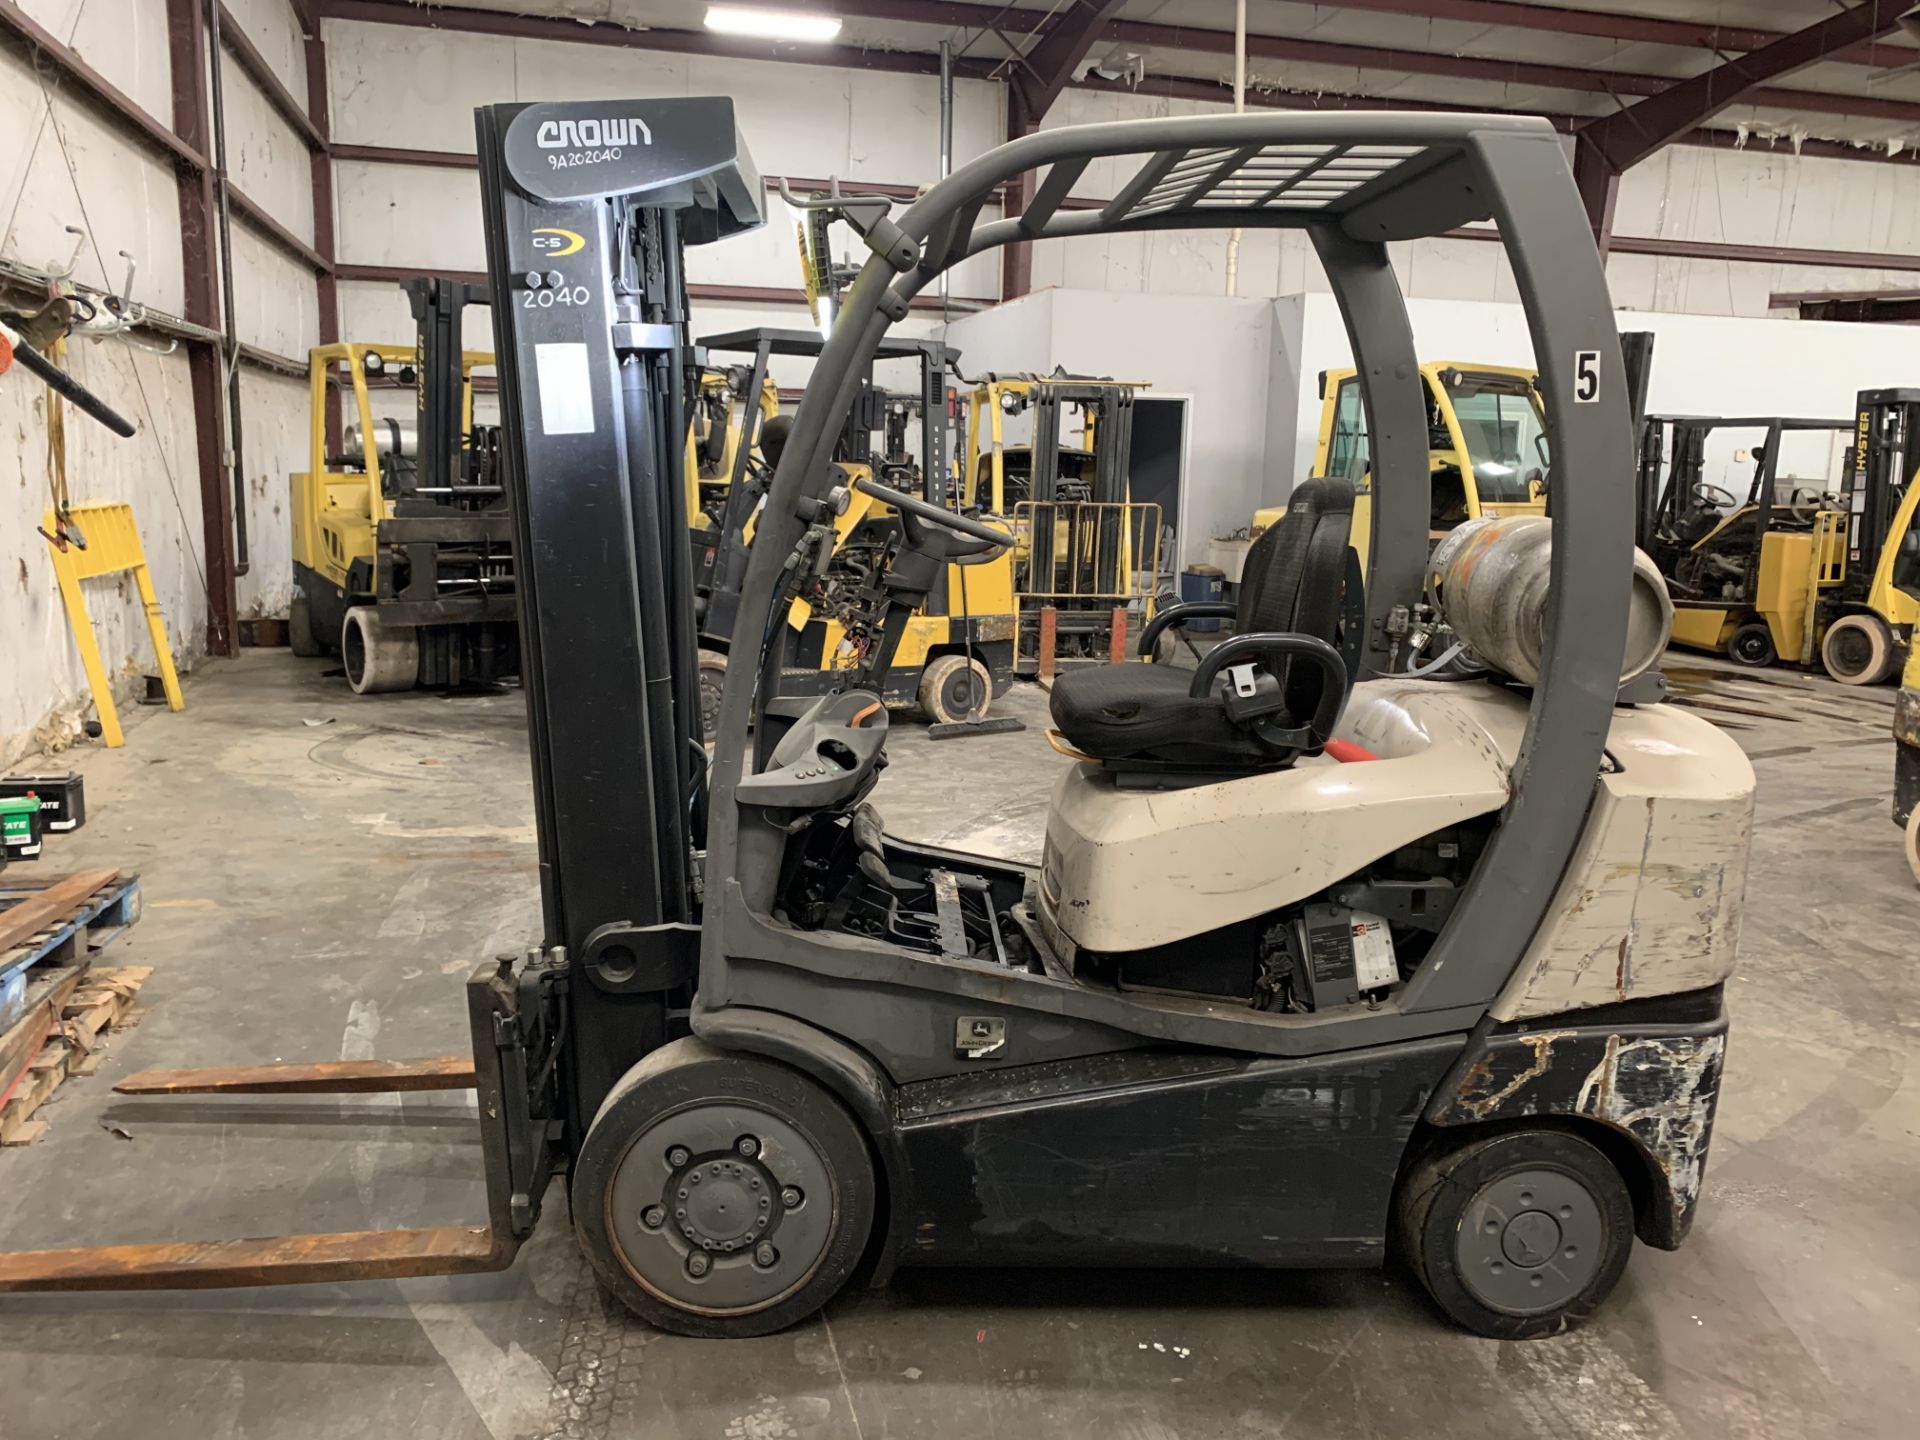 ***LOCATED IN HAMILTON, OHIO*** 2013 CROWN 5,000 LB. C-5 FORKLIFT, LPG, 3-STAGE MAST, 7,375 HOURS - Image 3 of 6